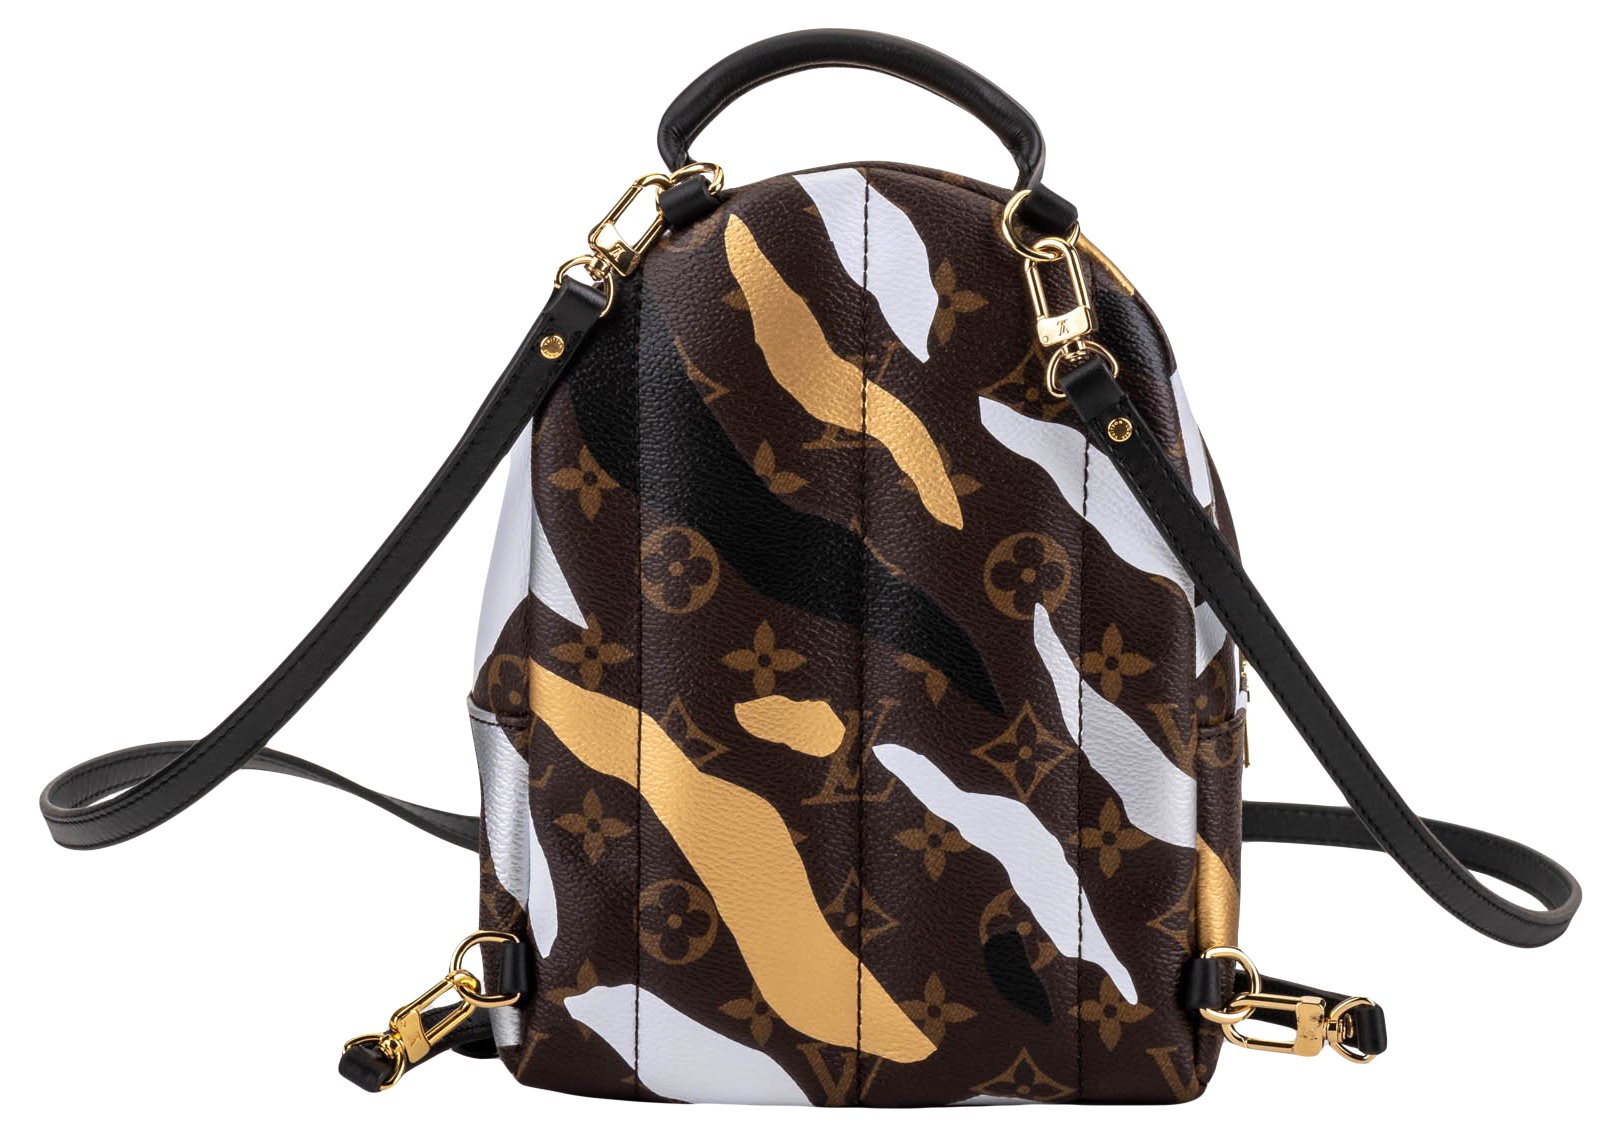 NEW LOL Limited Edition Louis Vuitton Palm Springs Mini backpack